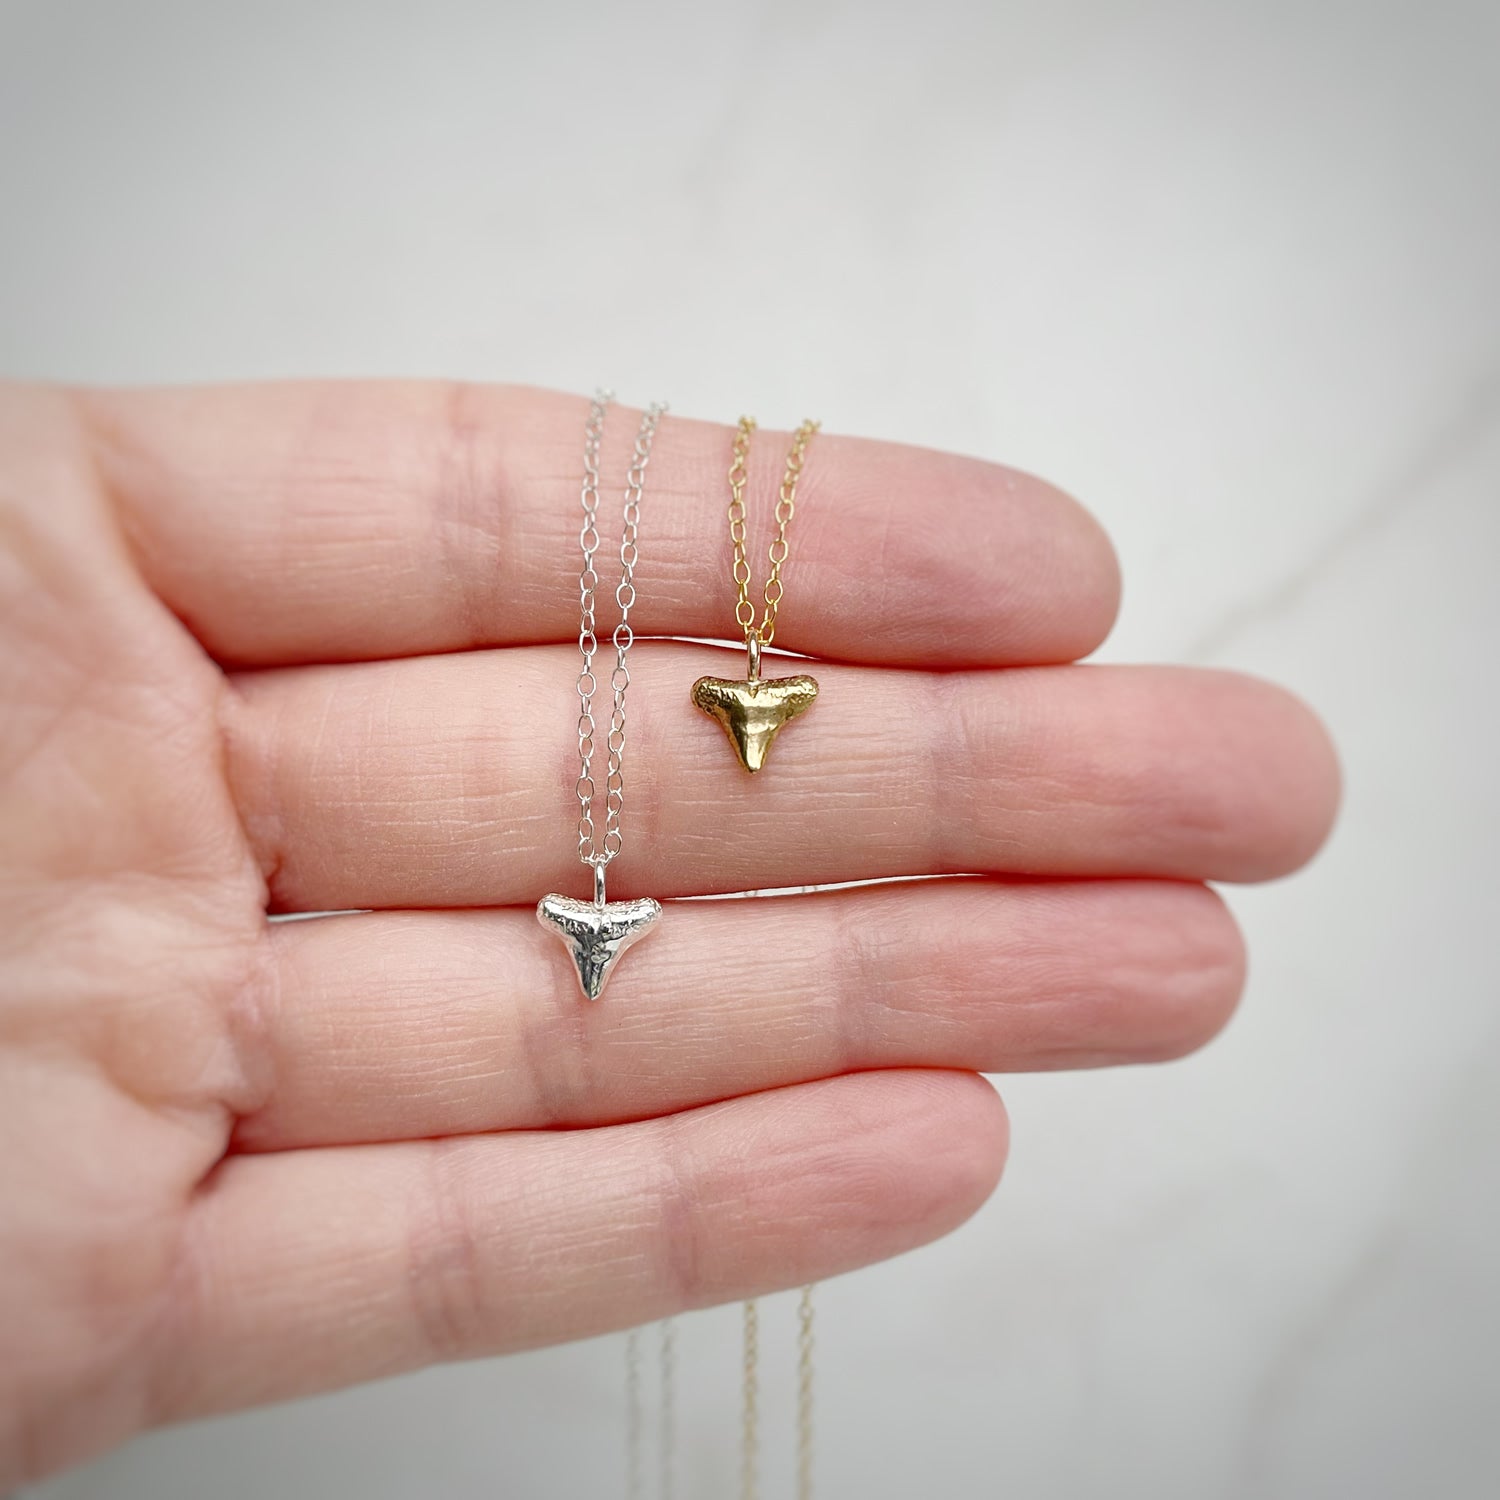 sterling silver and gold vermeil shark tooth necklaces in a person's hand with a white background